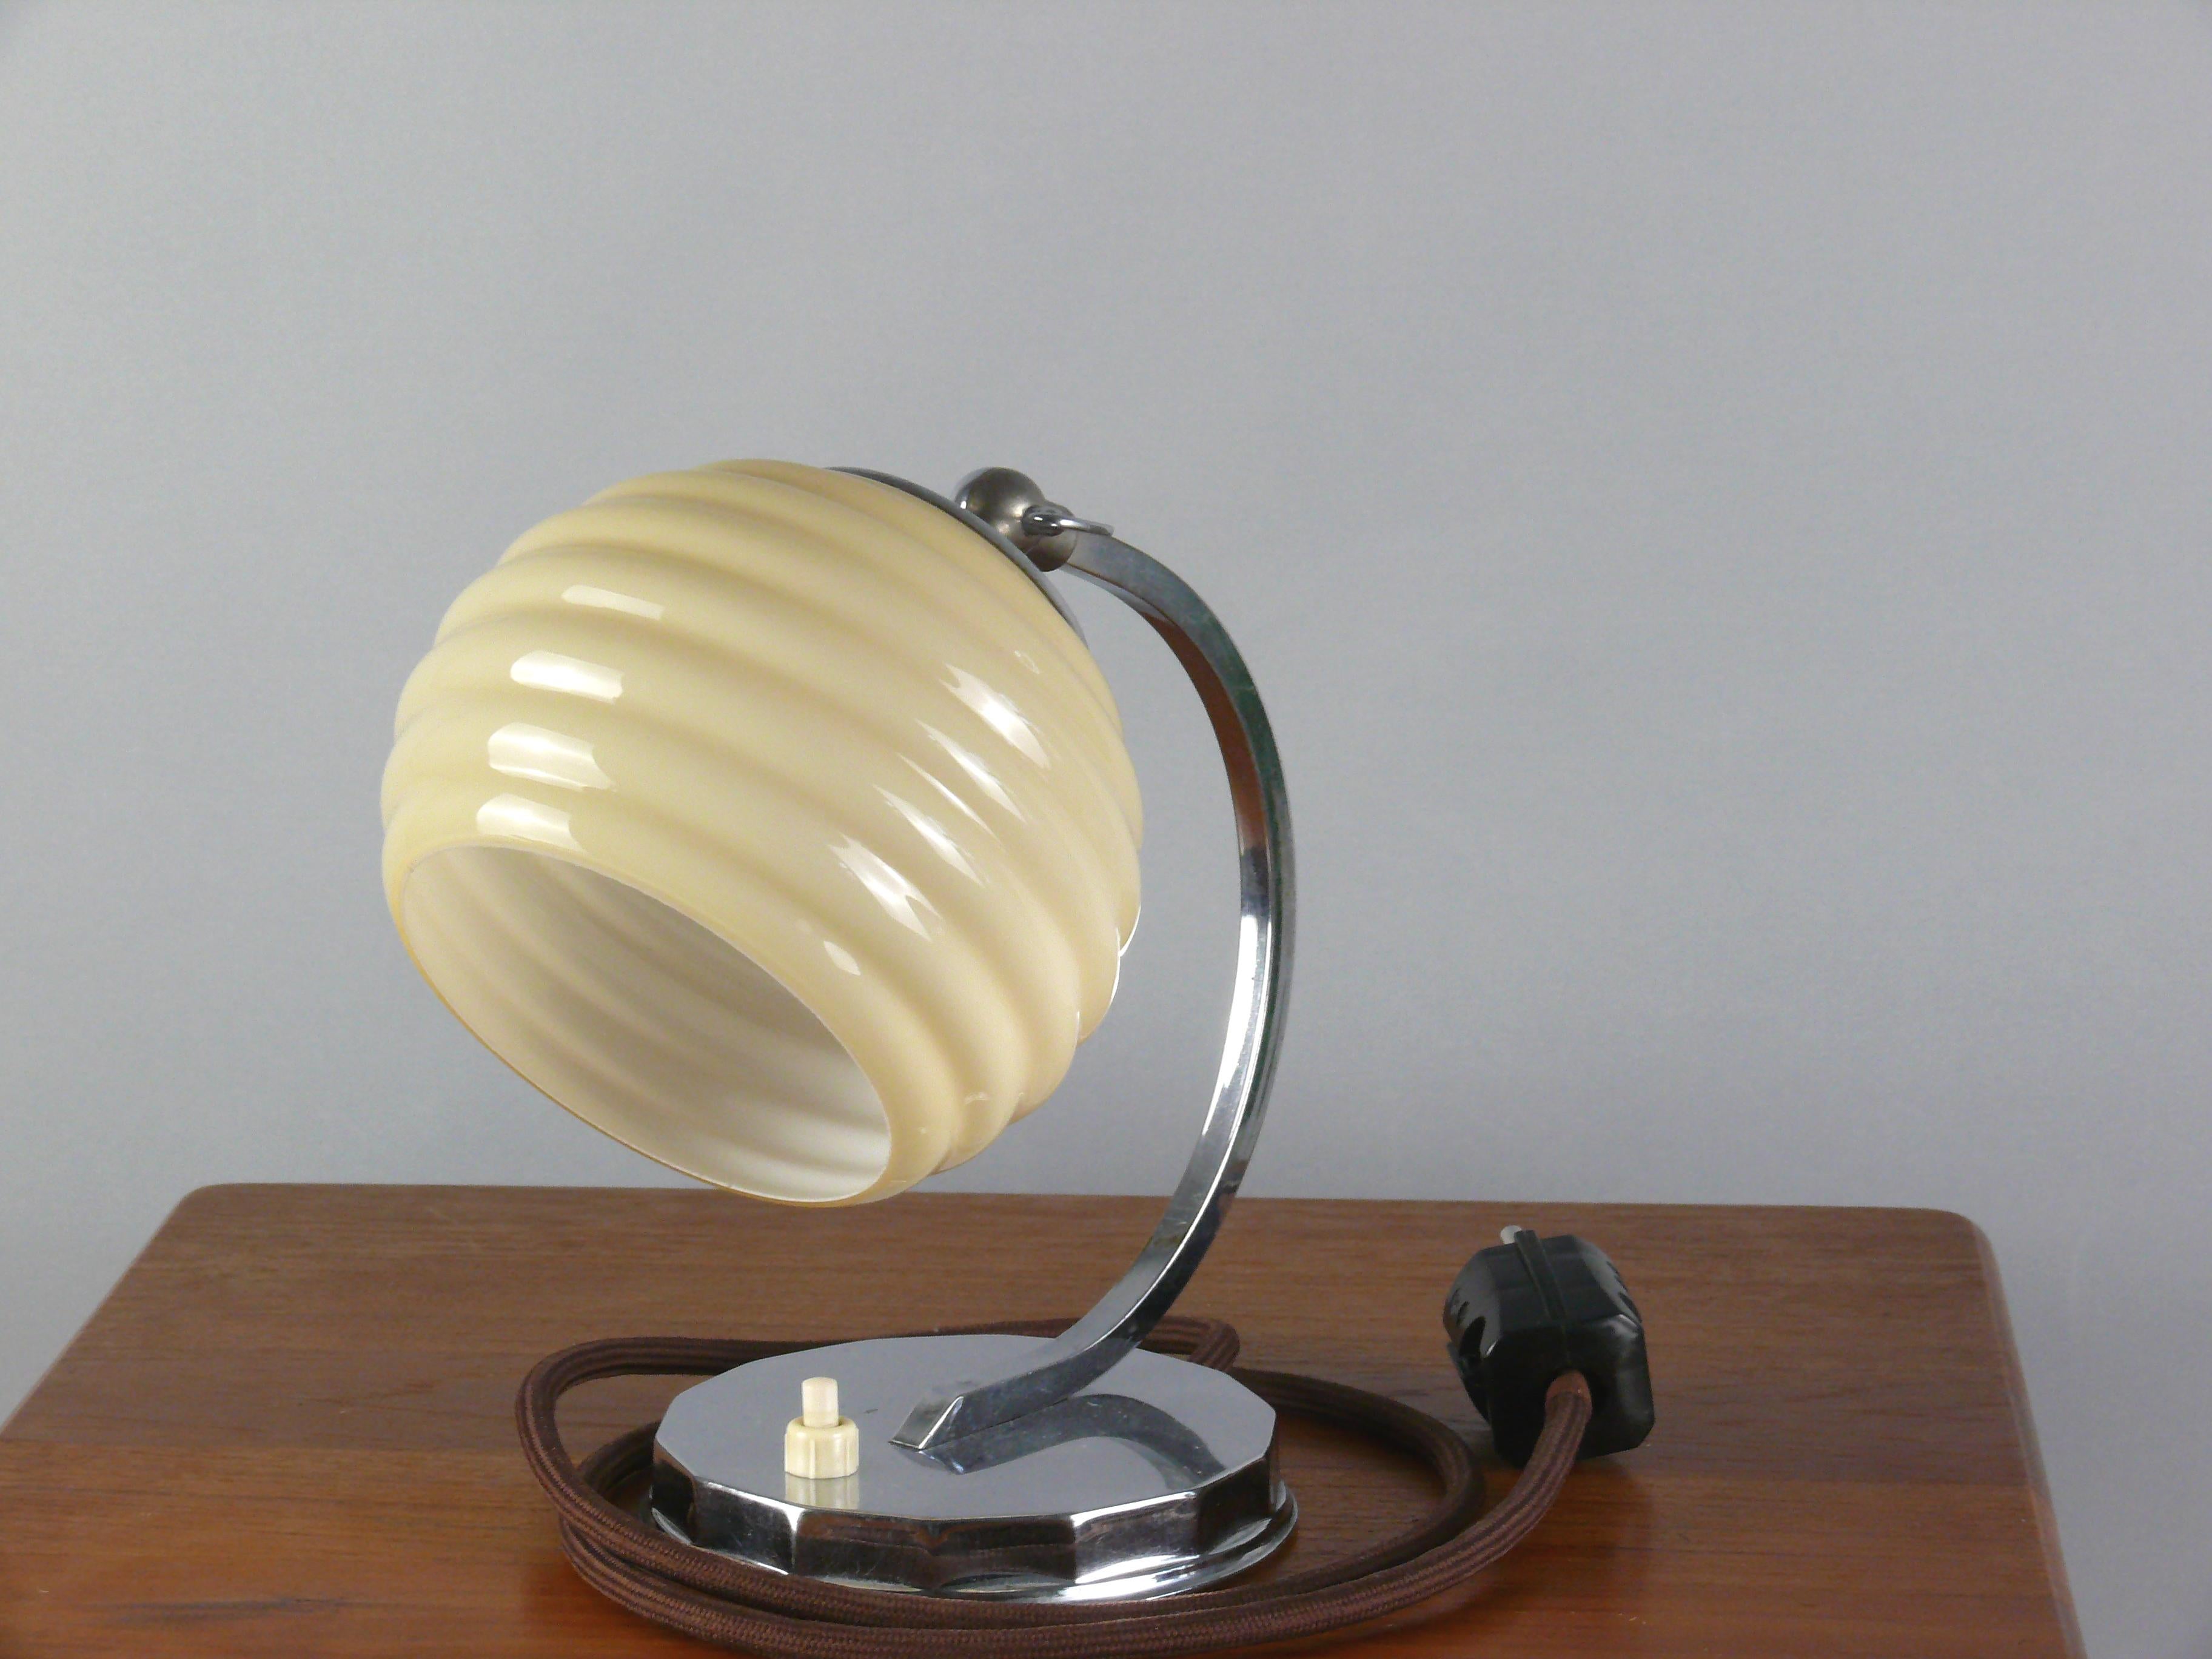 Art Deco table lamp, probably from the 1930s in good condition. The lamp impresses with its shiny chrome-plated round base and the decorative shade. The lamp is equipped with an E 27 brass socket and the height of the shade can be adjusted using a